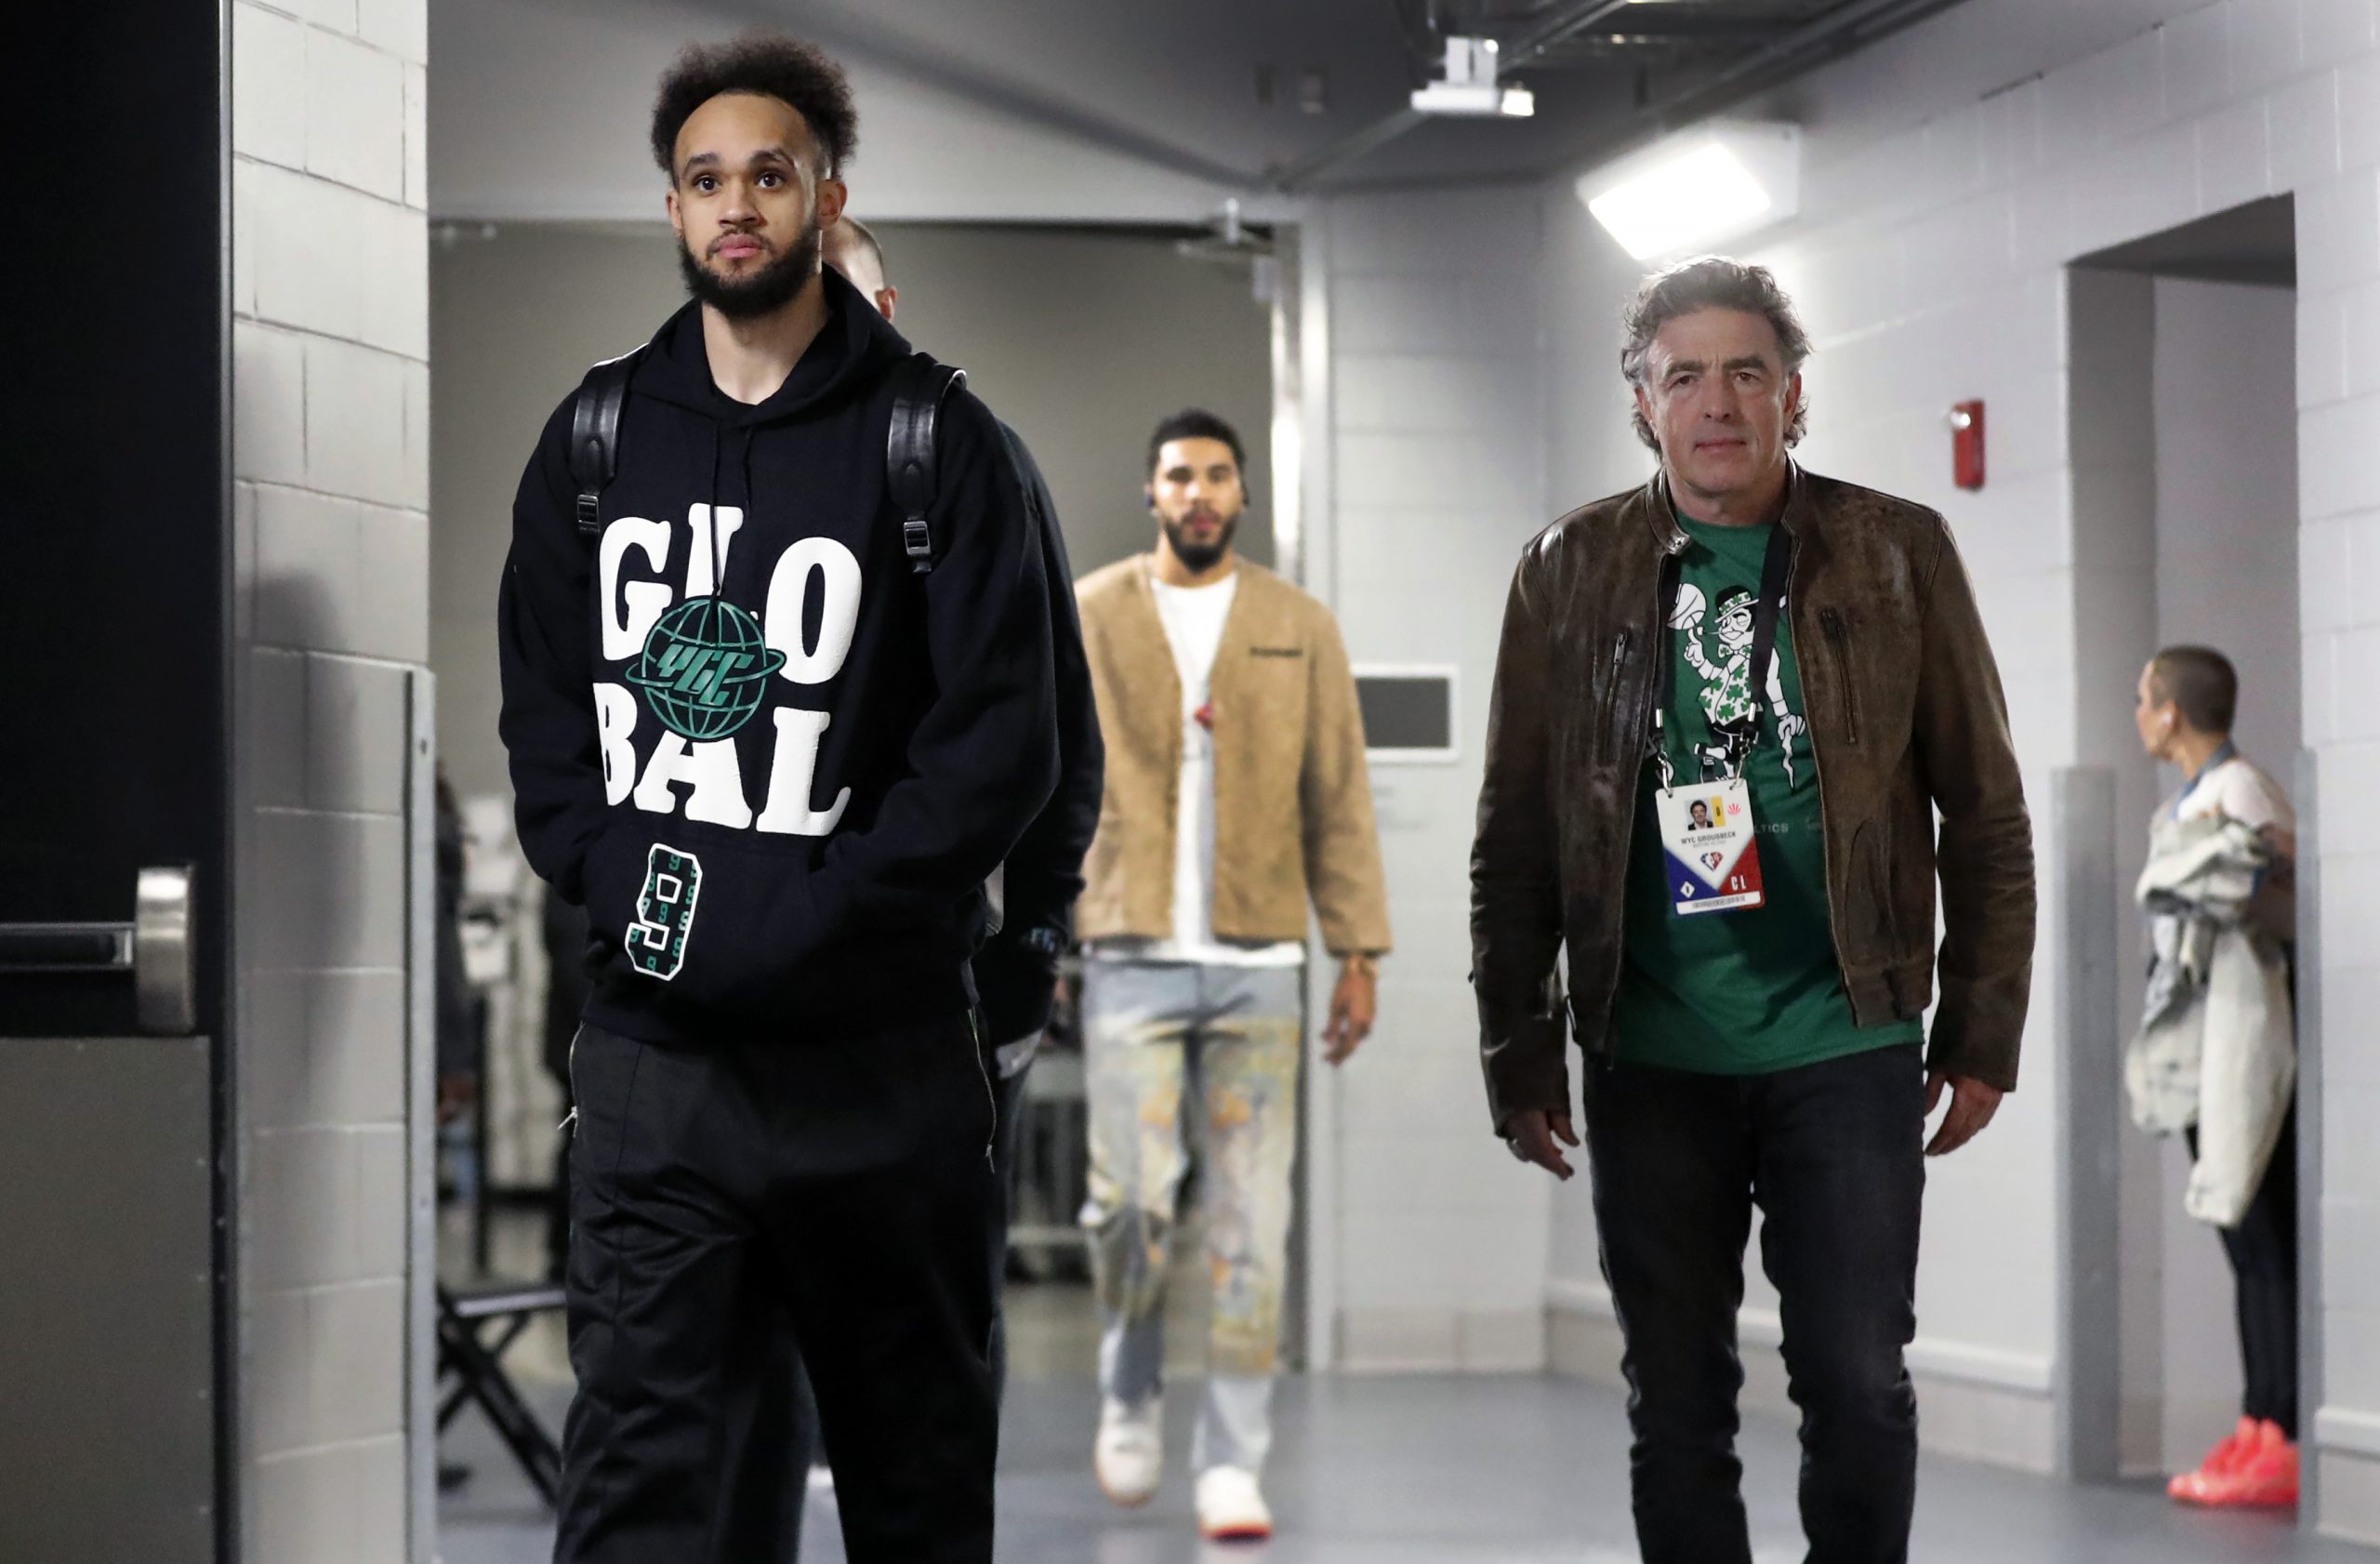 The Celtics Derrick White (left), team owner Wyc Grousbeck (right) and Jayson Tatum (background center) are pictured walking down the hall to the visitor's locker room in Milwaukee.